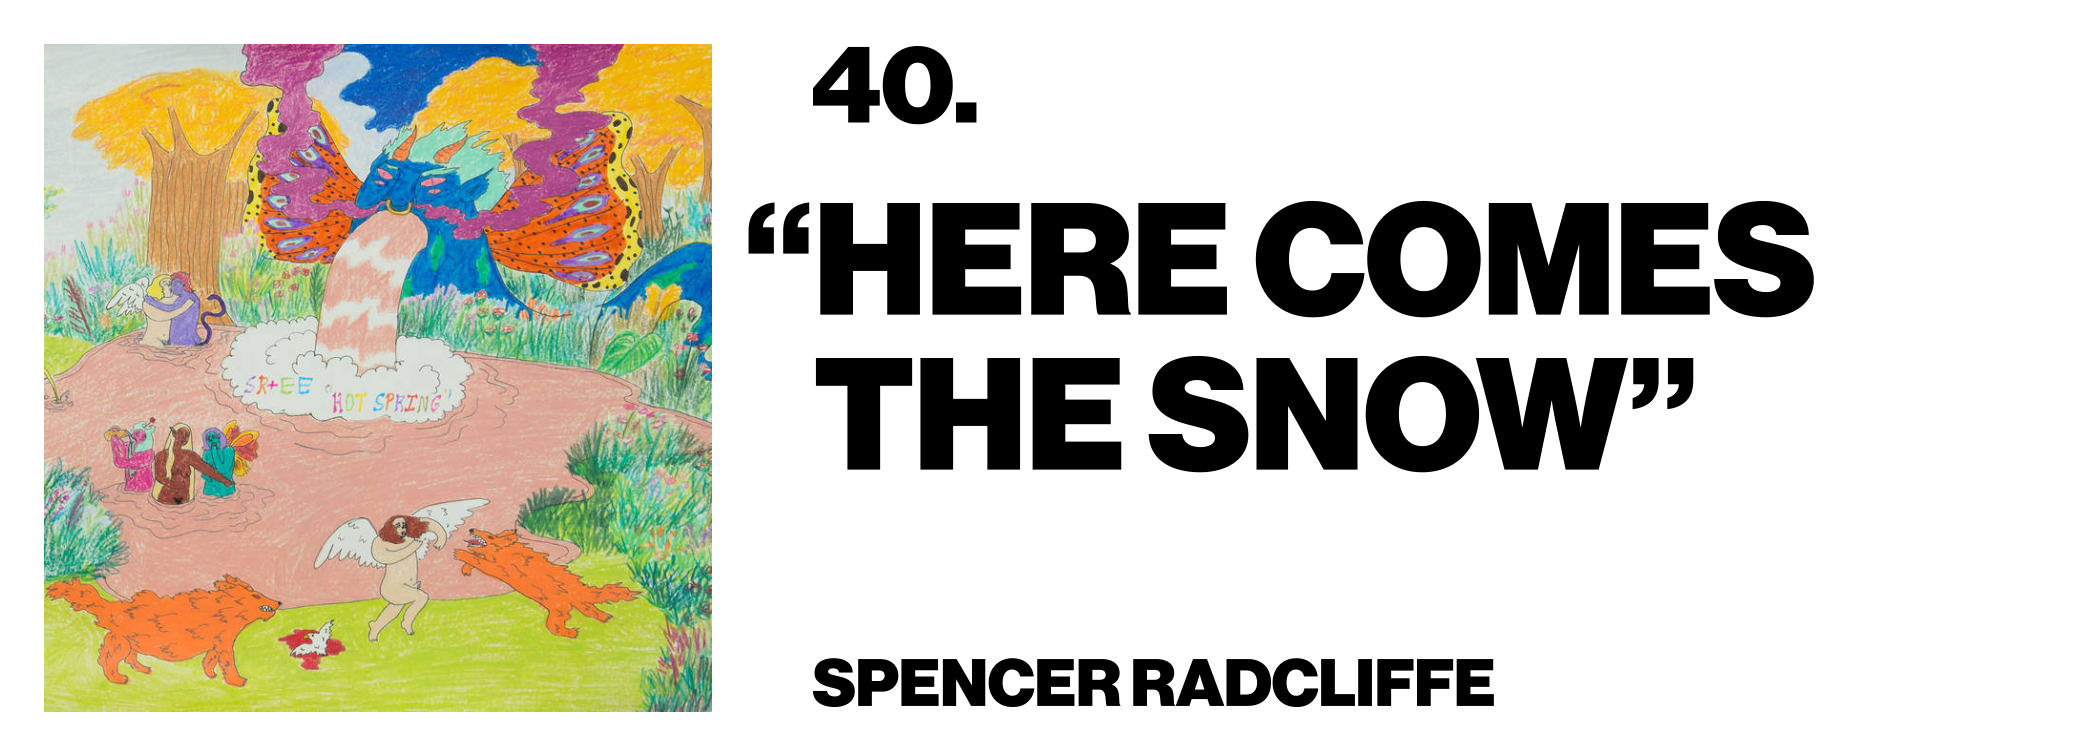 1576518846552-40-Spencer-Radcliffe-Here-Comes-The-Snow